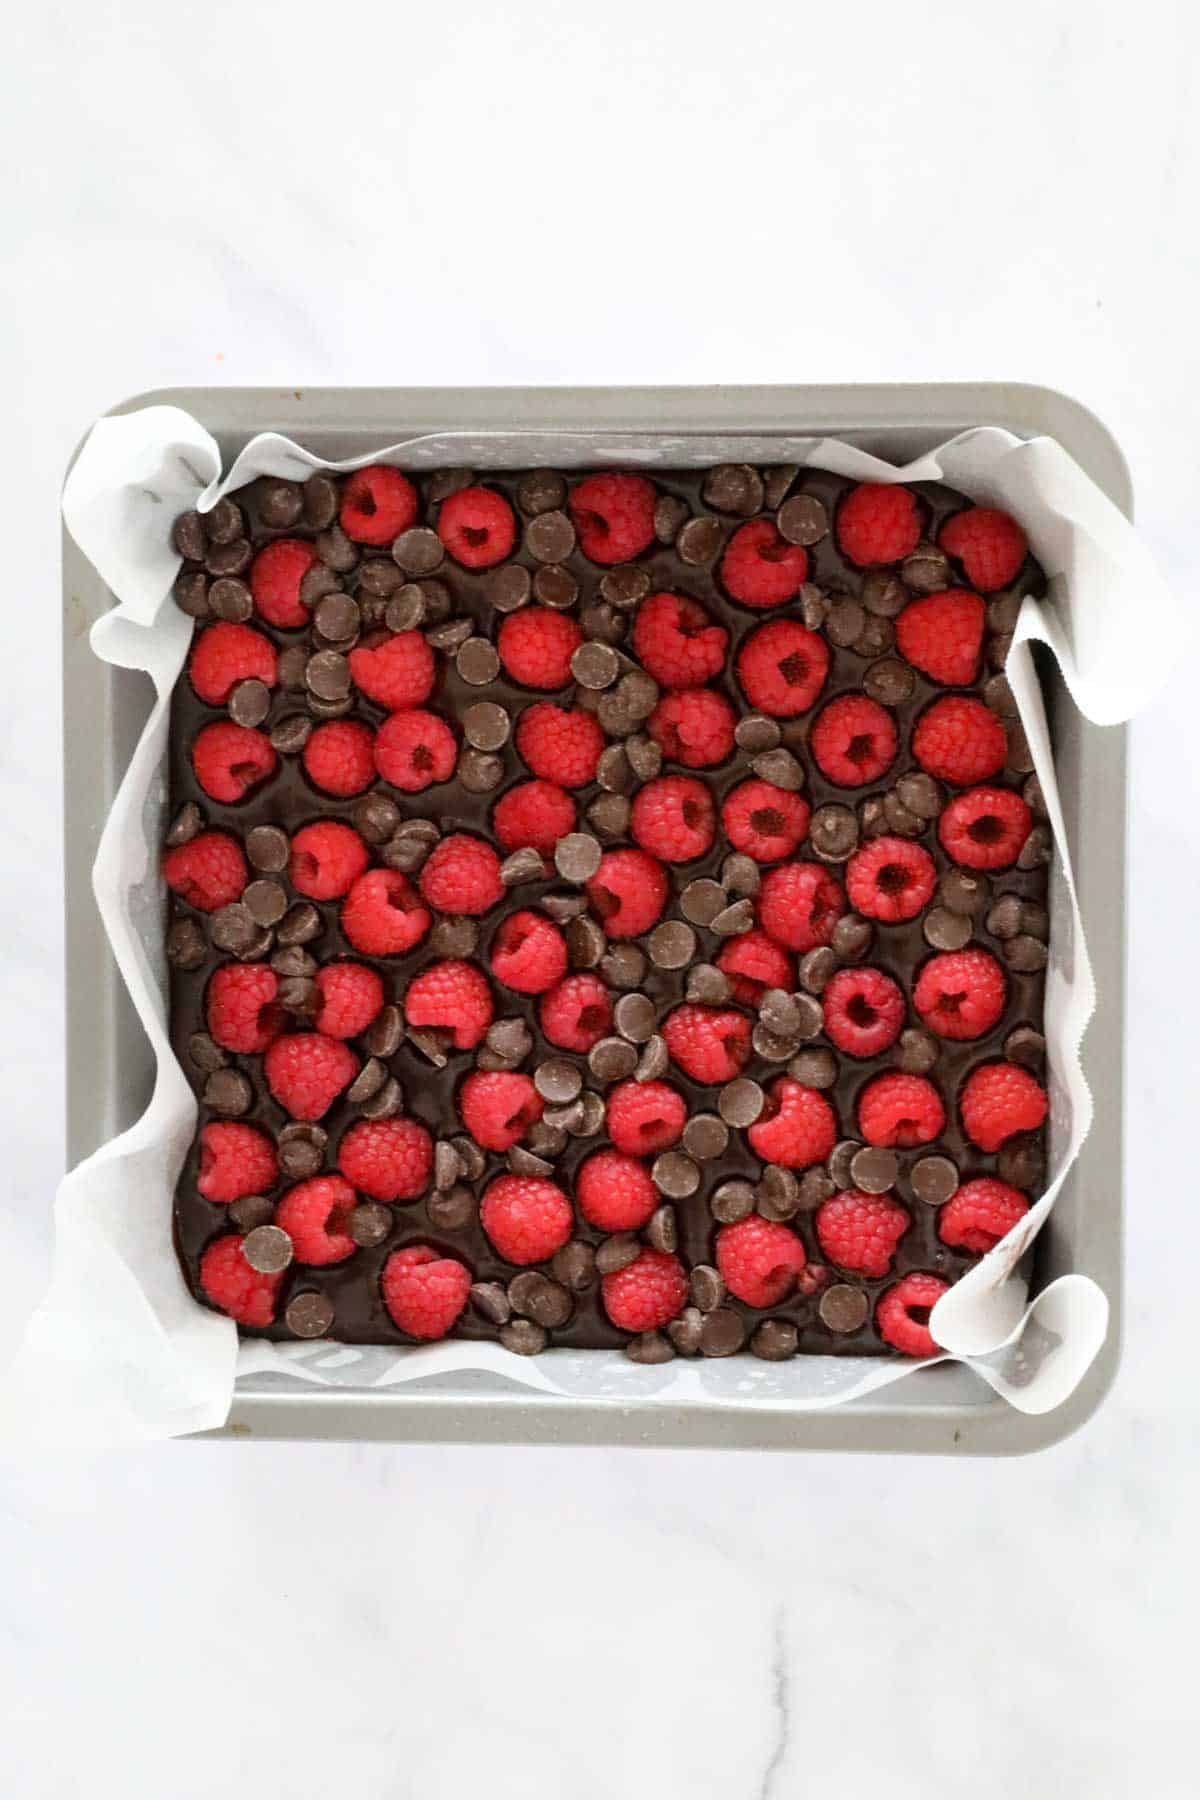 Fresh raspberries sprinkled over the top of the chocolate brownie.